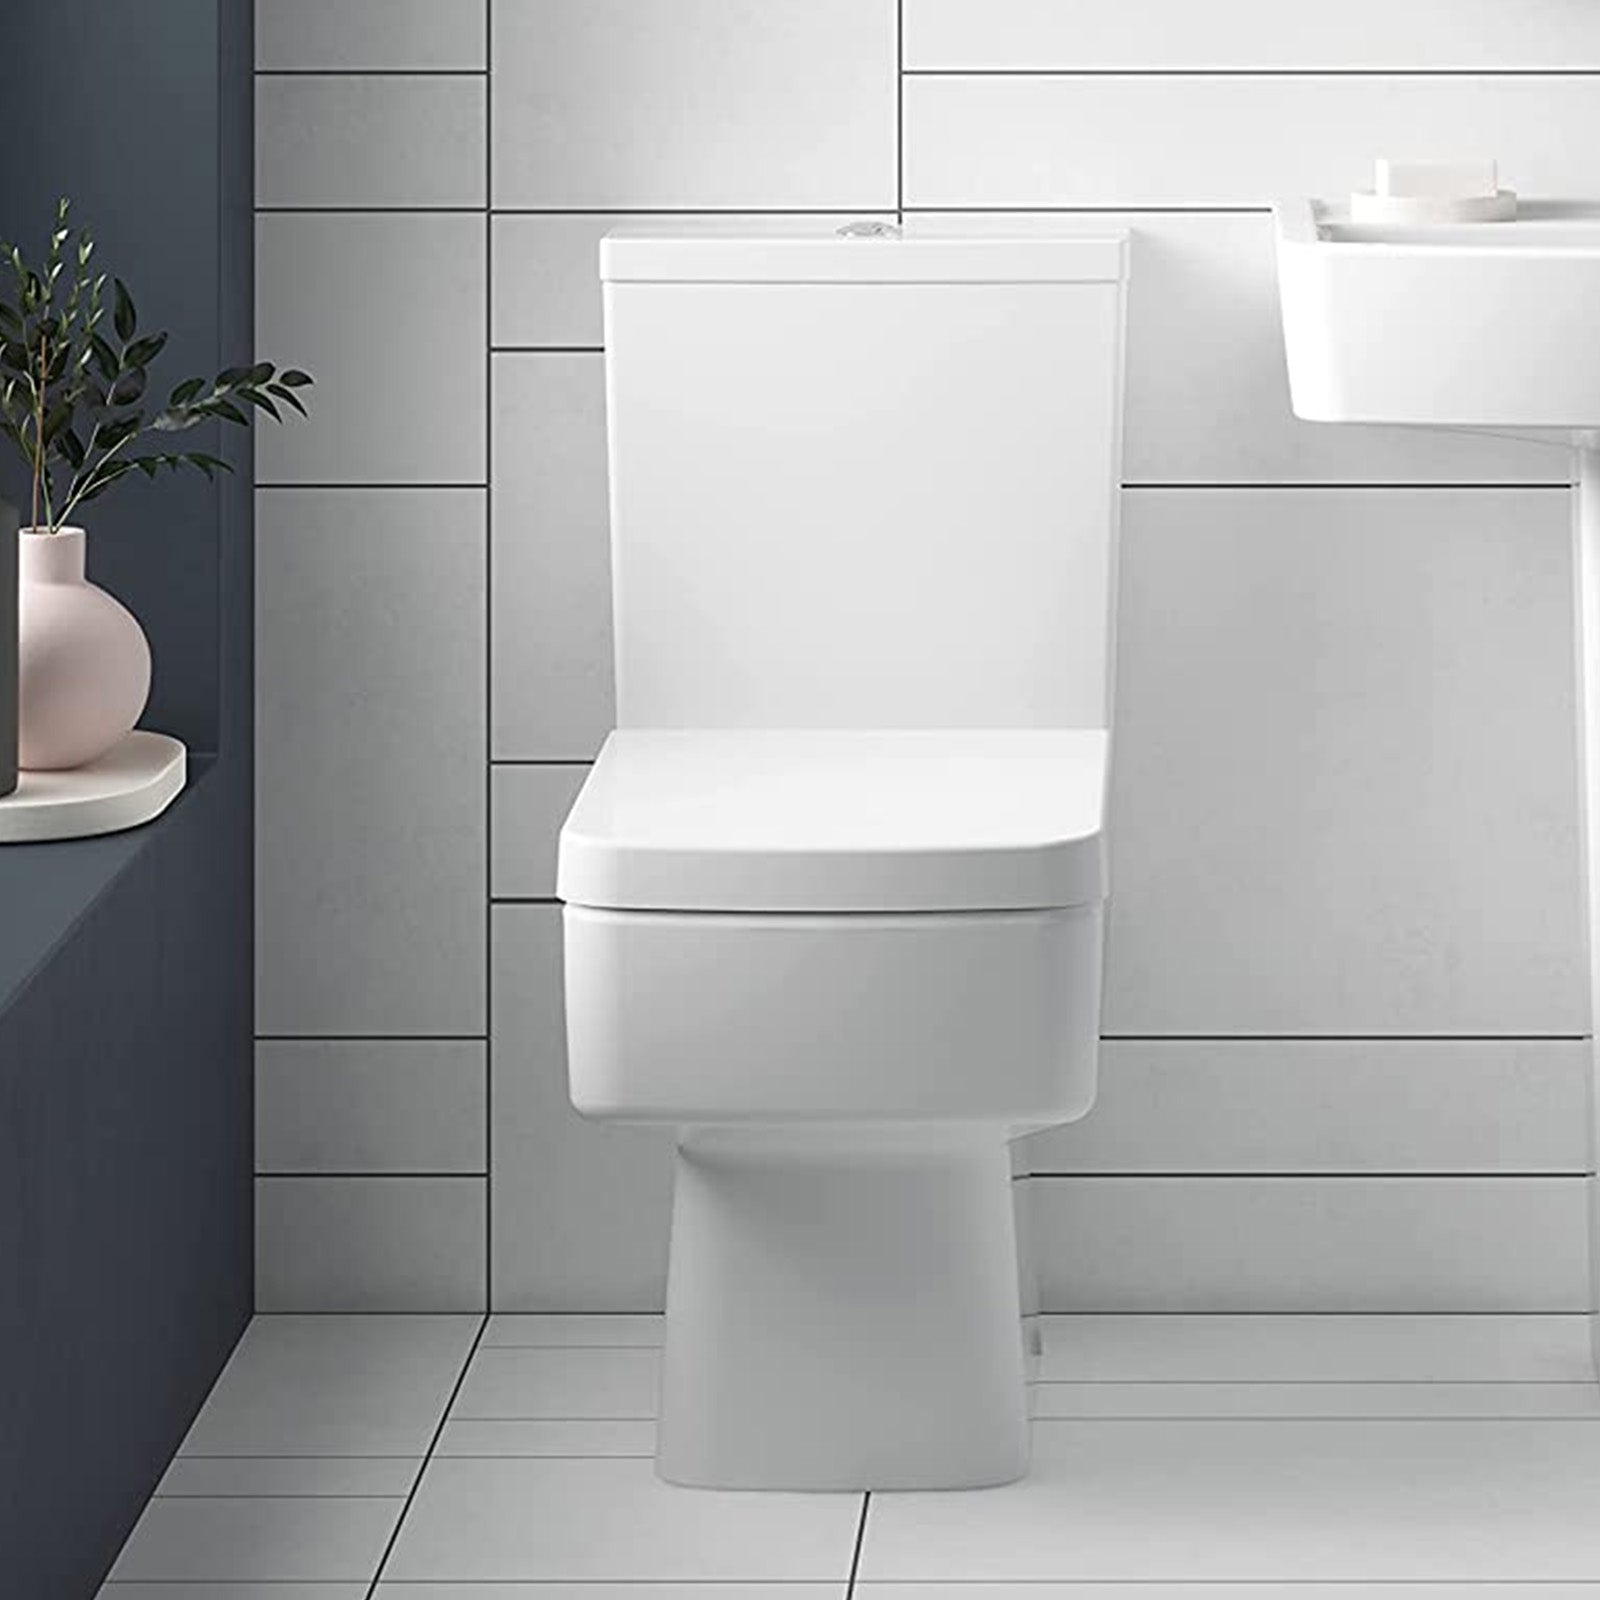 Nuie Legend Modern Square Close Coupled Toilet Bathroom WC Pan, Toilet Seat & Cistern